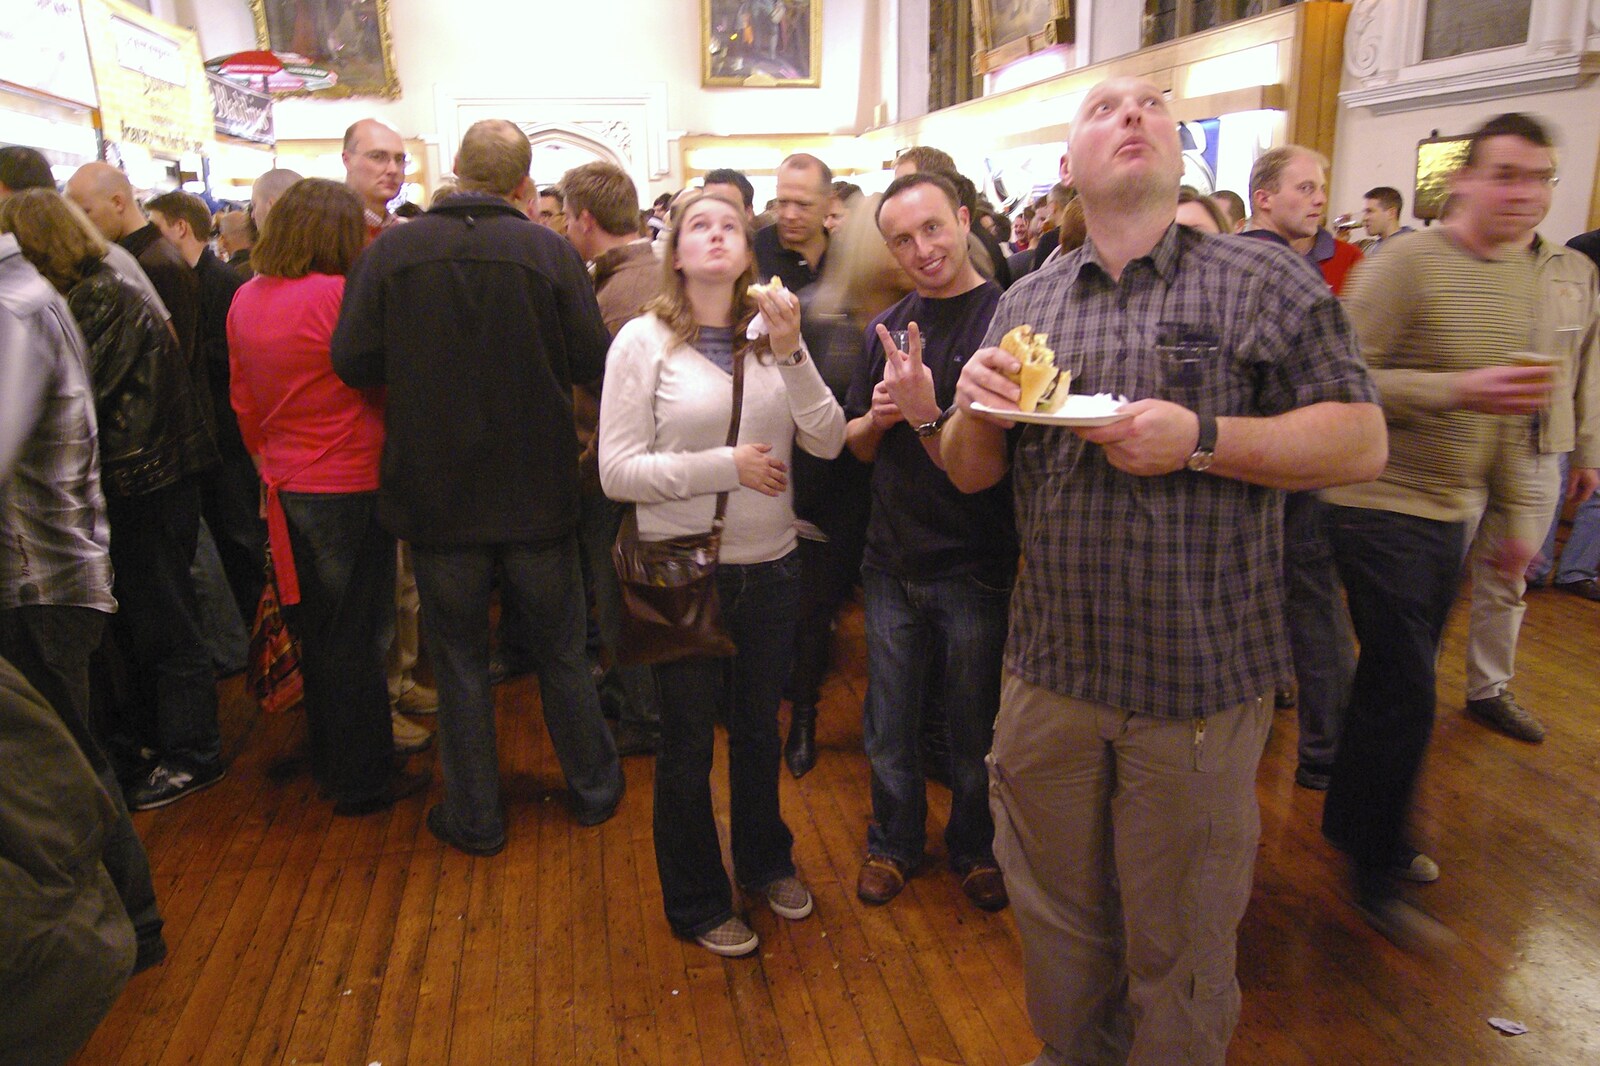 The 30th Norwich Beer Festival, St. Andrew's Hall, Norfolk - 24th October 2007: Isobel and Gov look up to watch the sparrowhawk